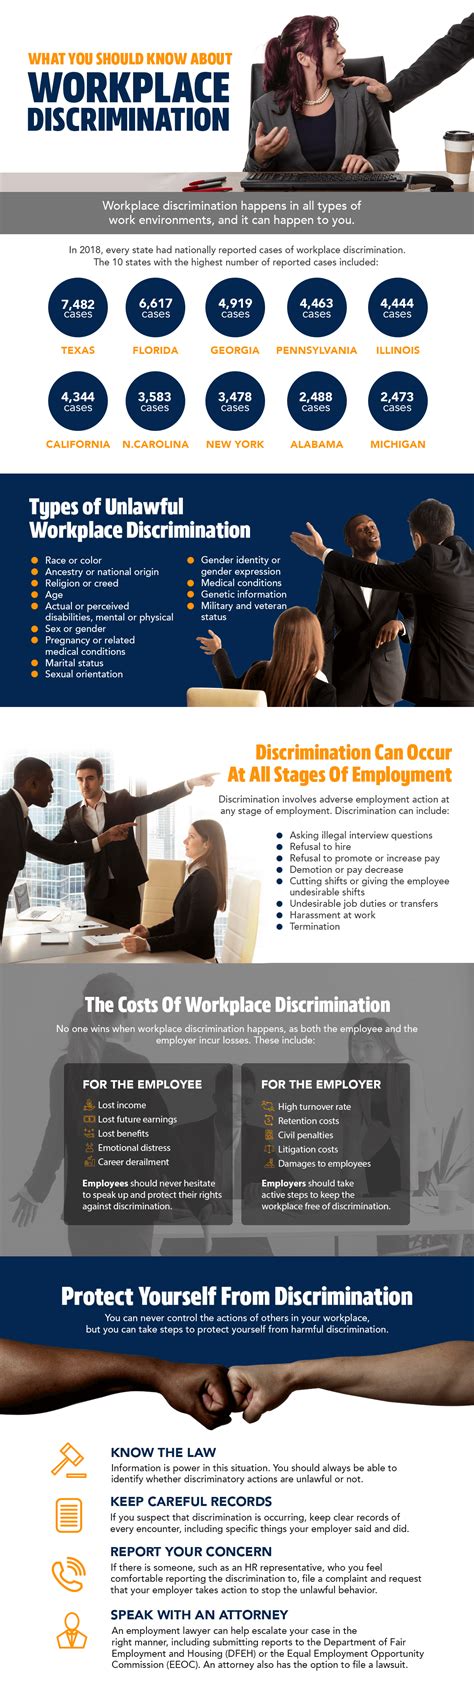 What You Should Know About Workplace Discrimination Allen Tx Plano